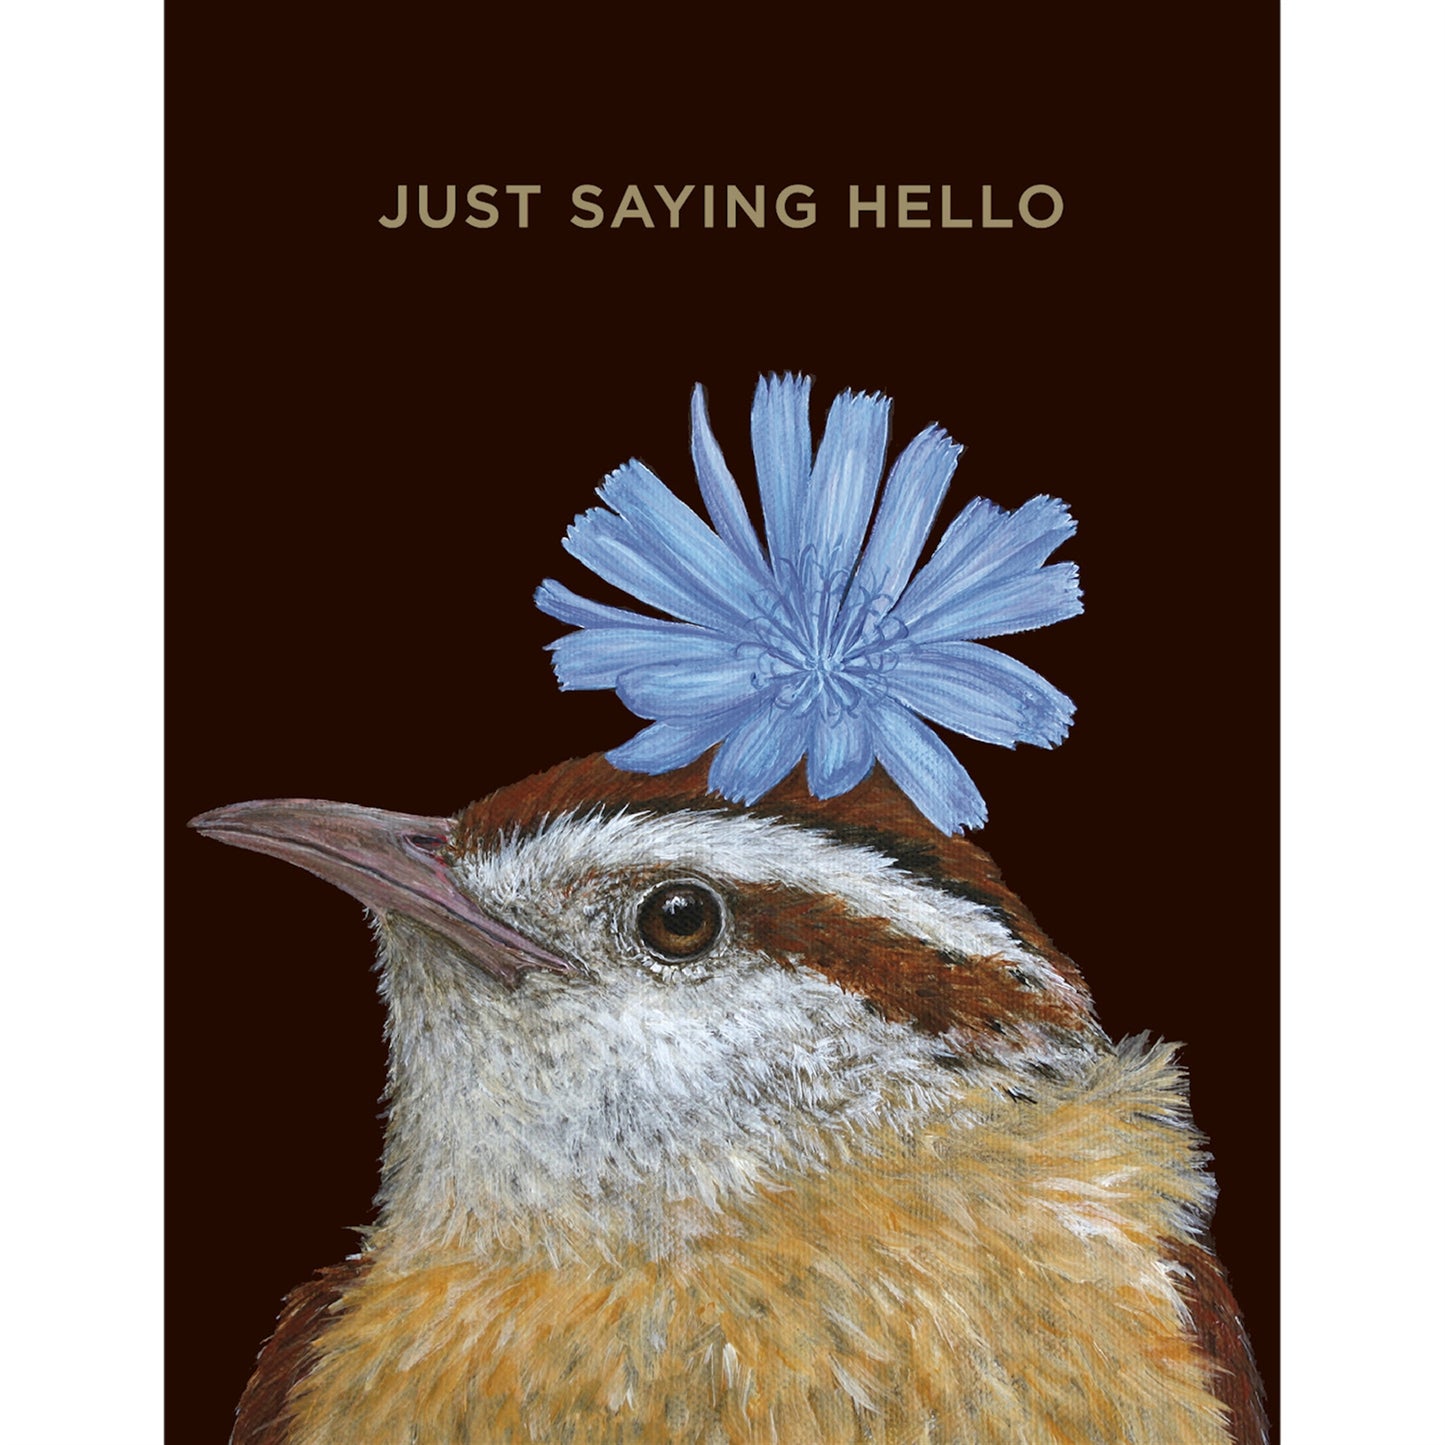 This sweet little wren just wants to say Hello!  Blue flower on top of her head